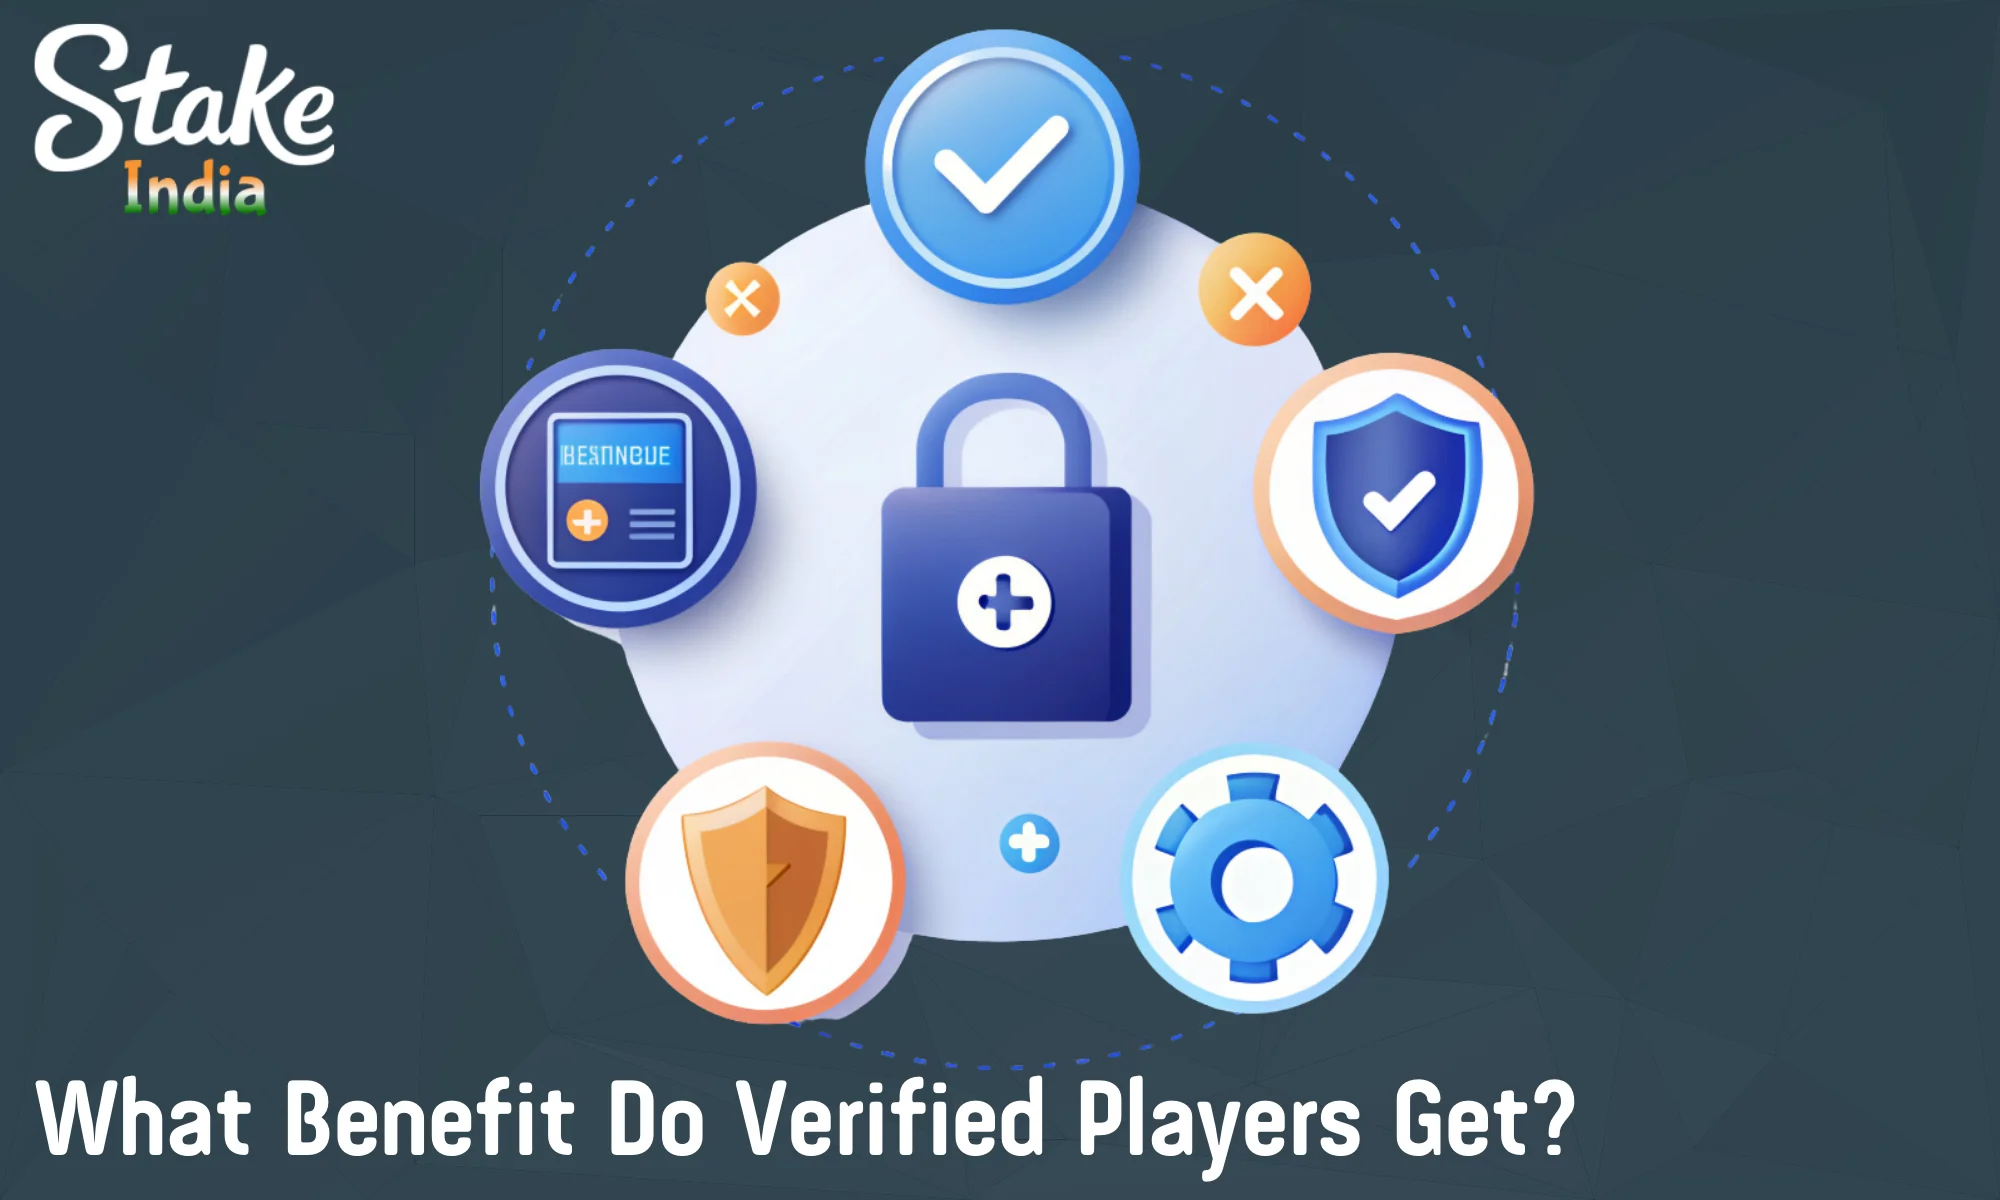 The main advantages for verified Stake casino players